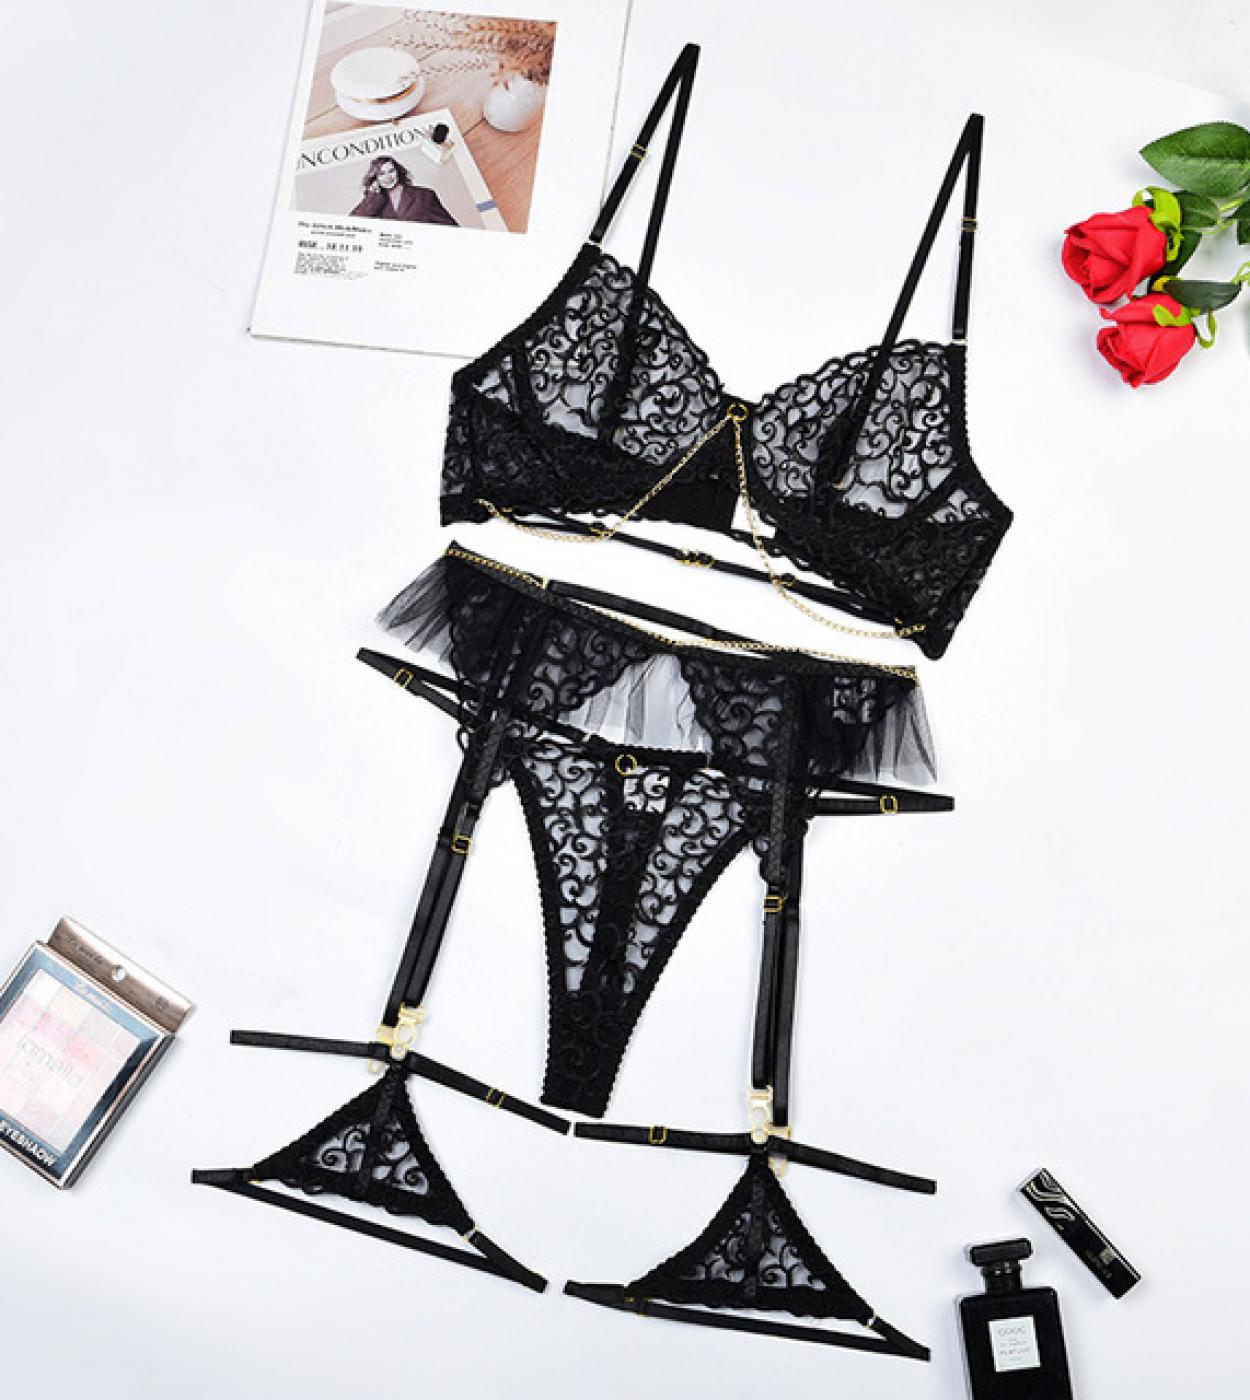 Intimate Black Porn - Porn Lingerie Lace Bra And Panty Embroidery Seamless Intimate Black Sensual  Set Women See Through Uncensored Costume